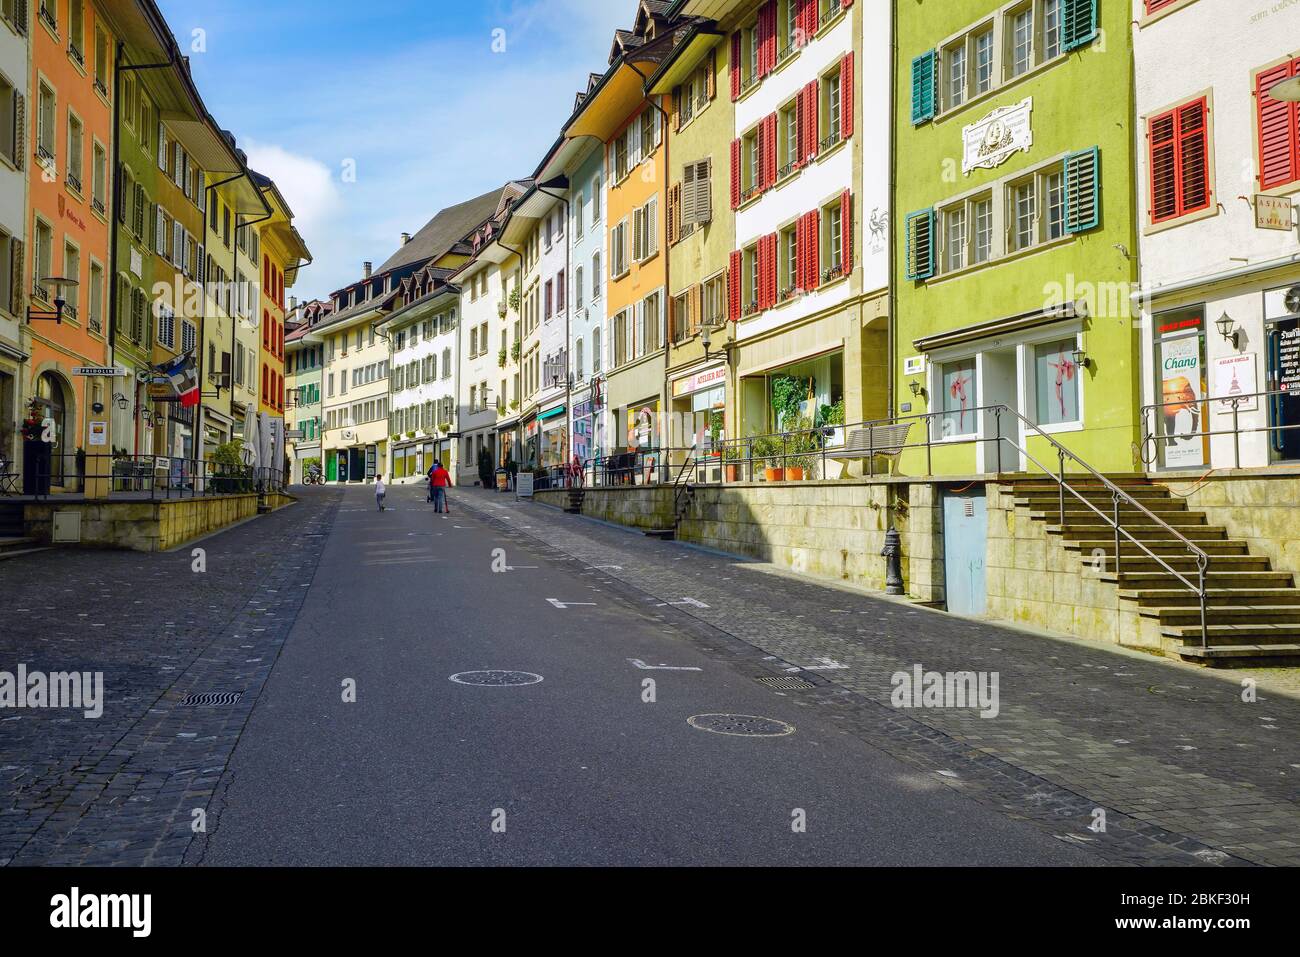 View of colorful main street (Hauptstrasse) in historic old town Brugg, Switzerland. Stock Photo